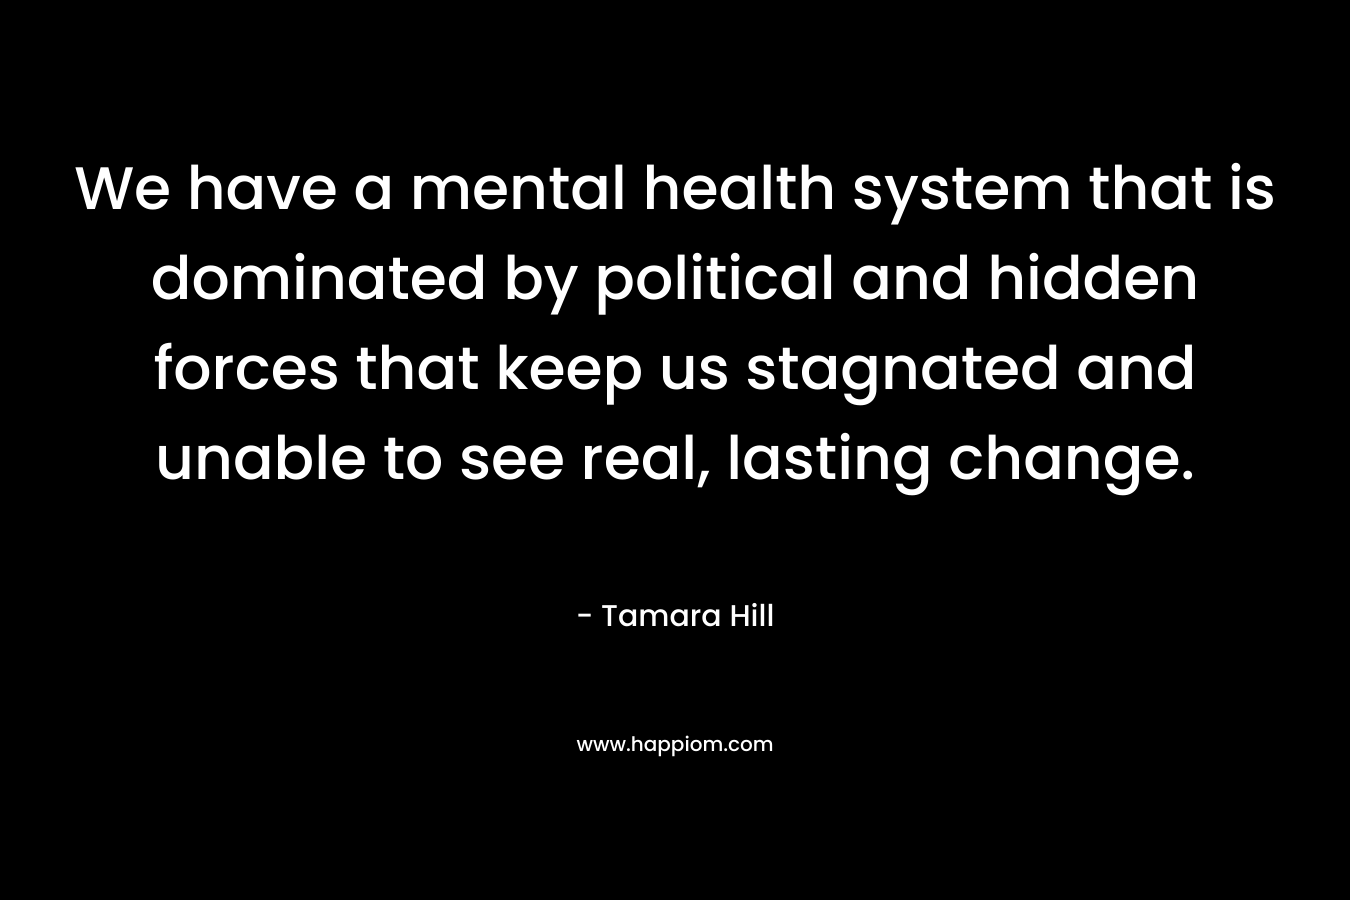 We have a mental health system that is dominated by political and hidden forces that keep us stagnated and unable to see real, lasting change.